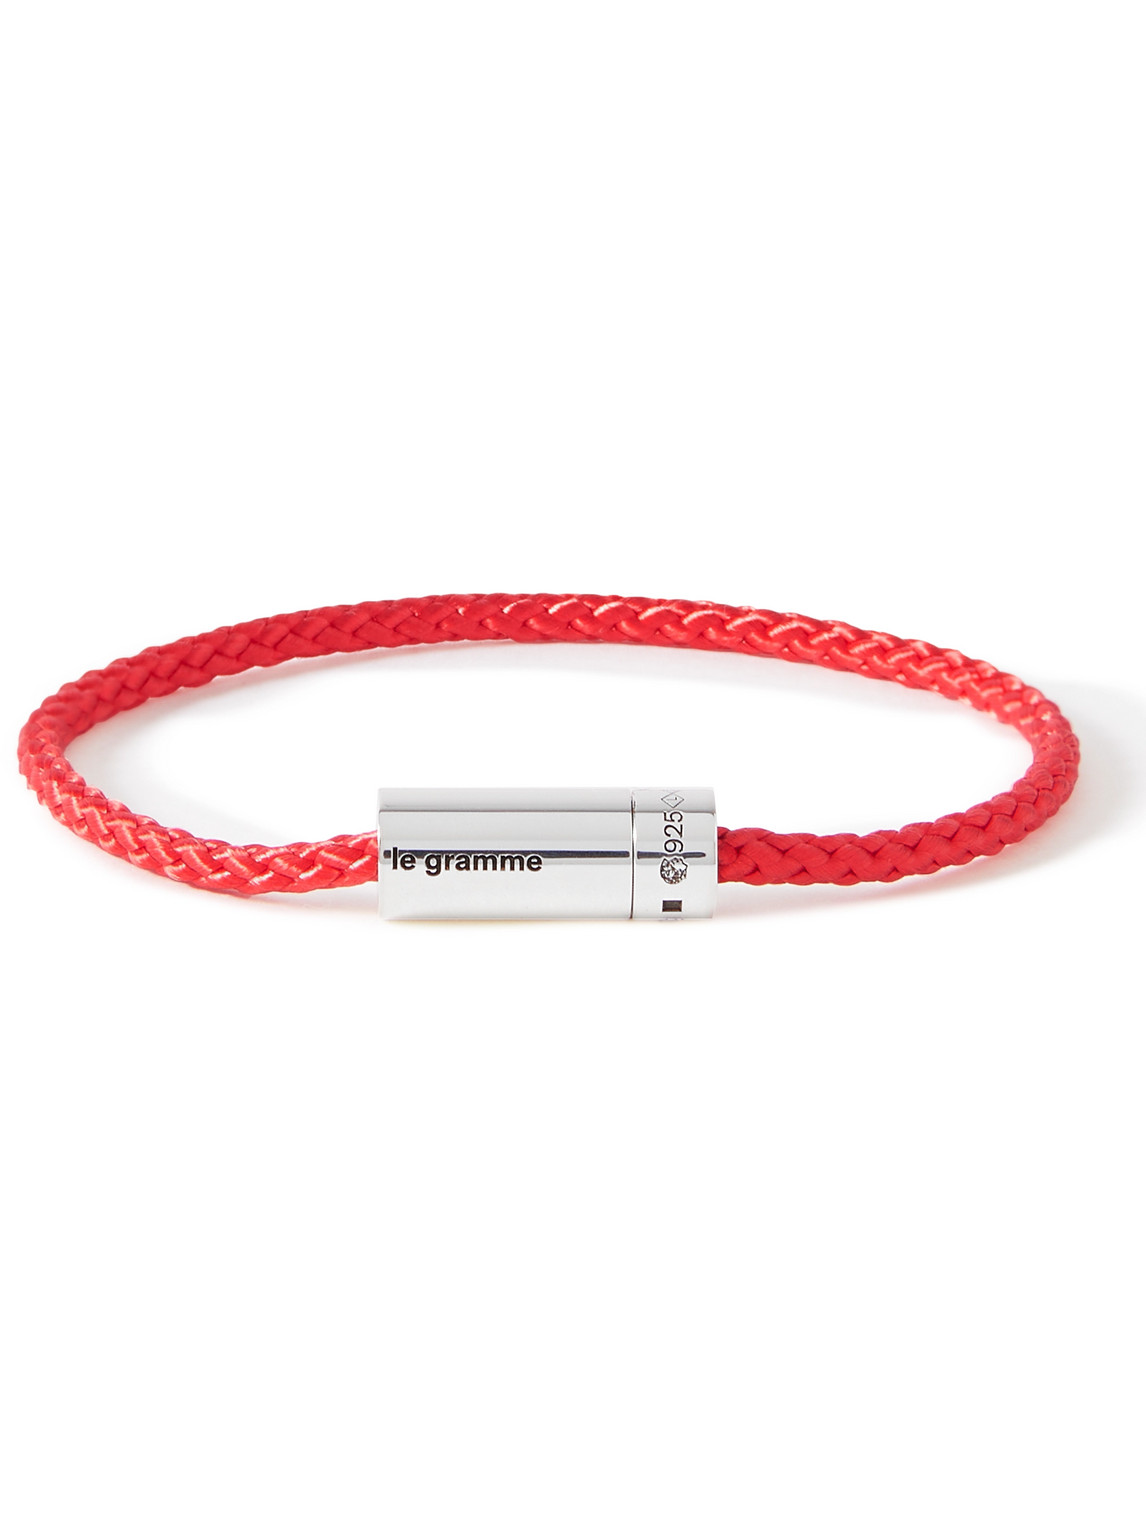 Le Gramme 7g Braided Cord And Sterling Silver Bracelet In Red